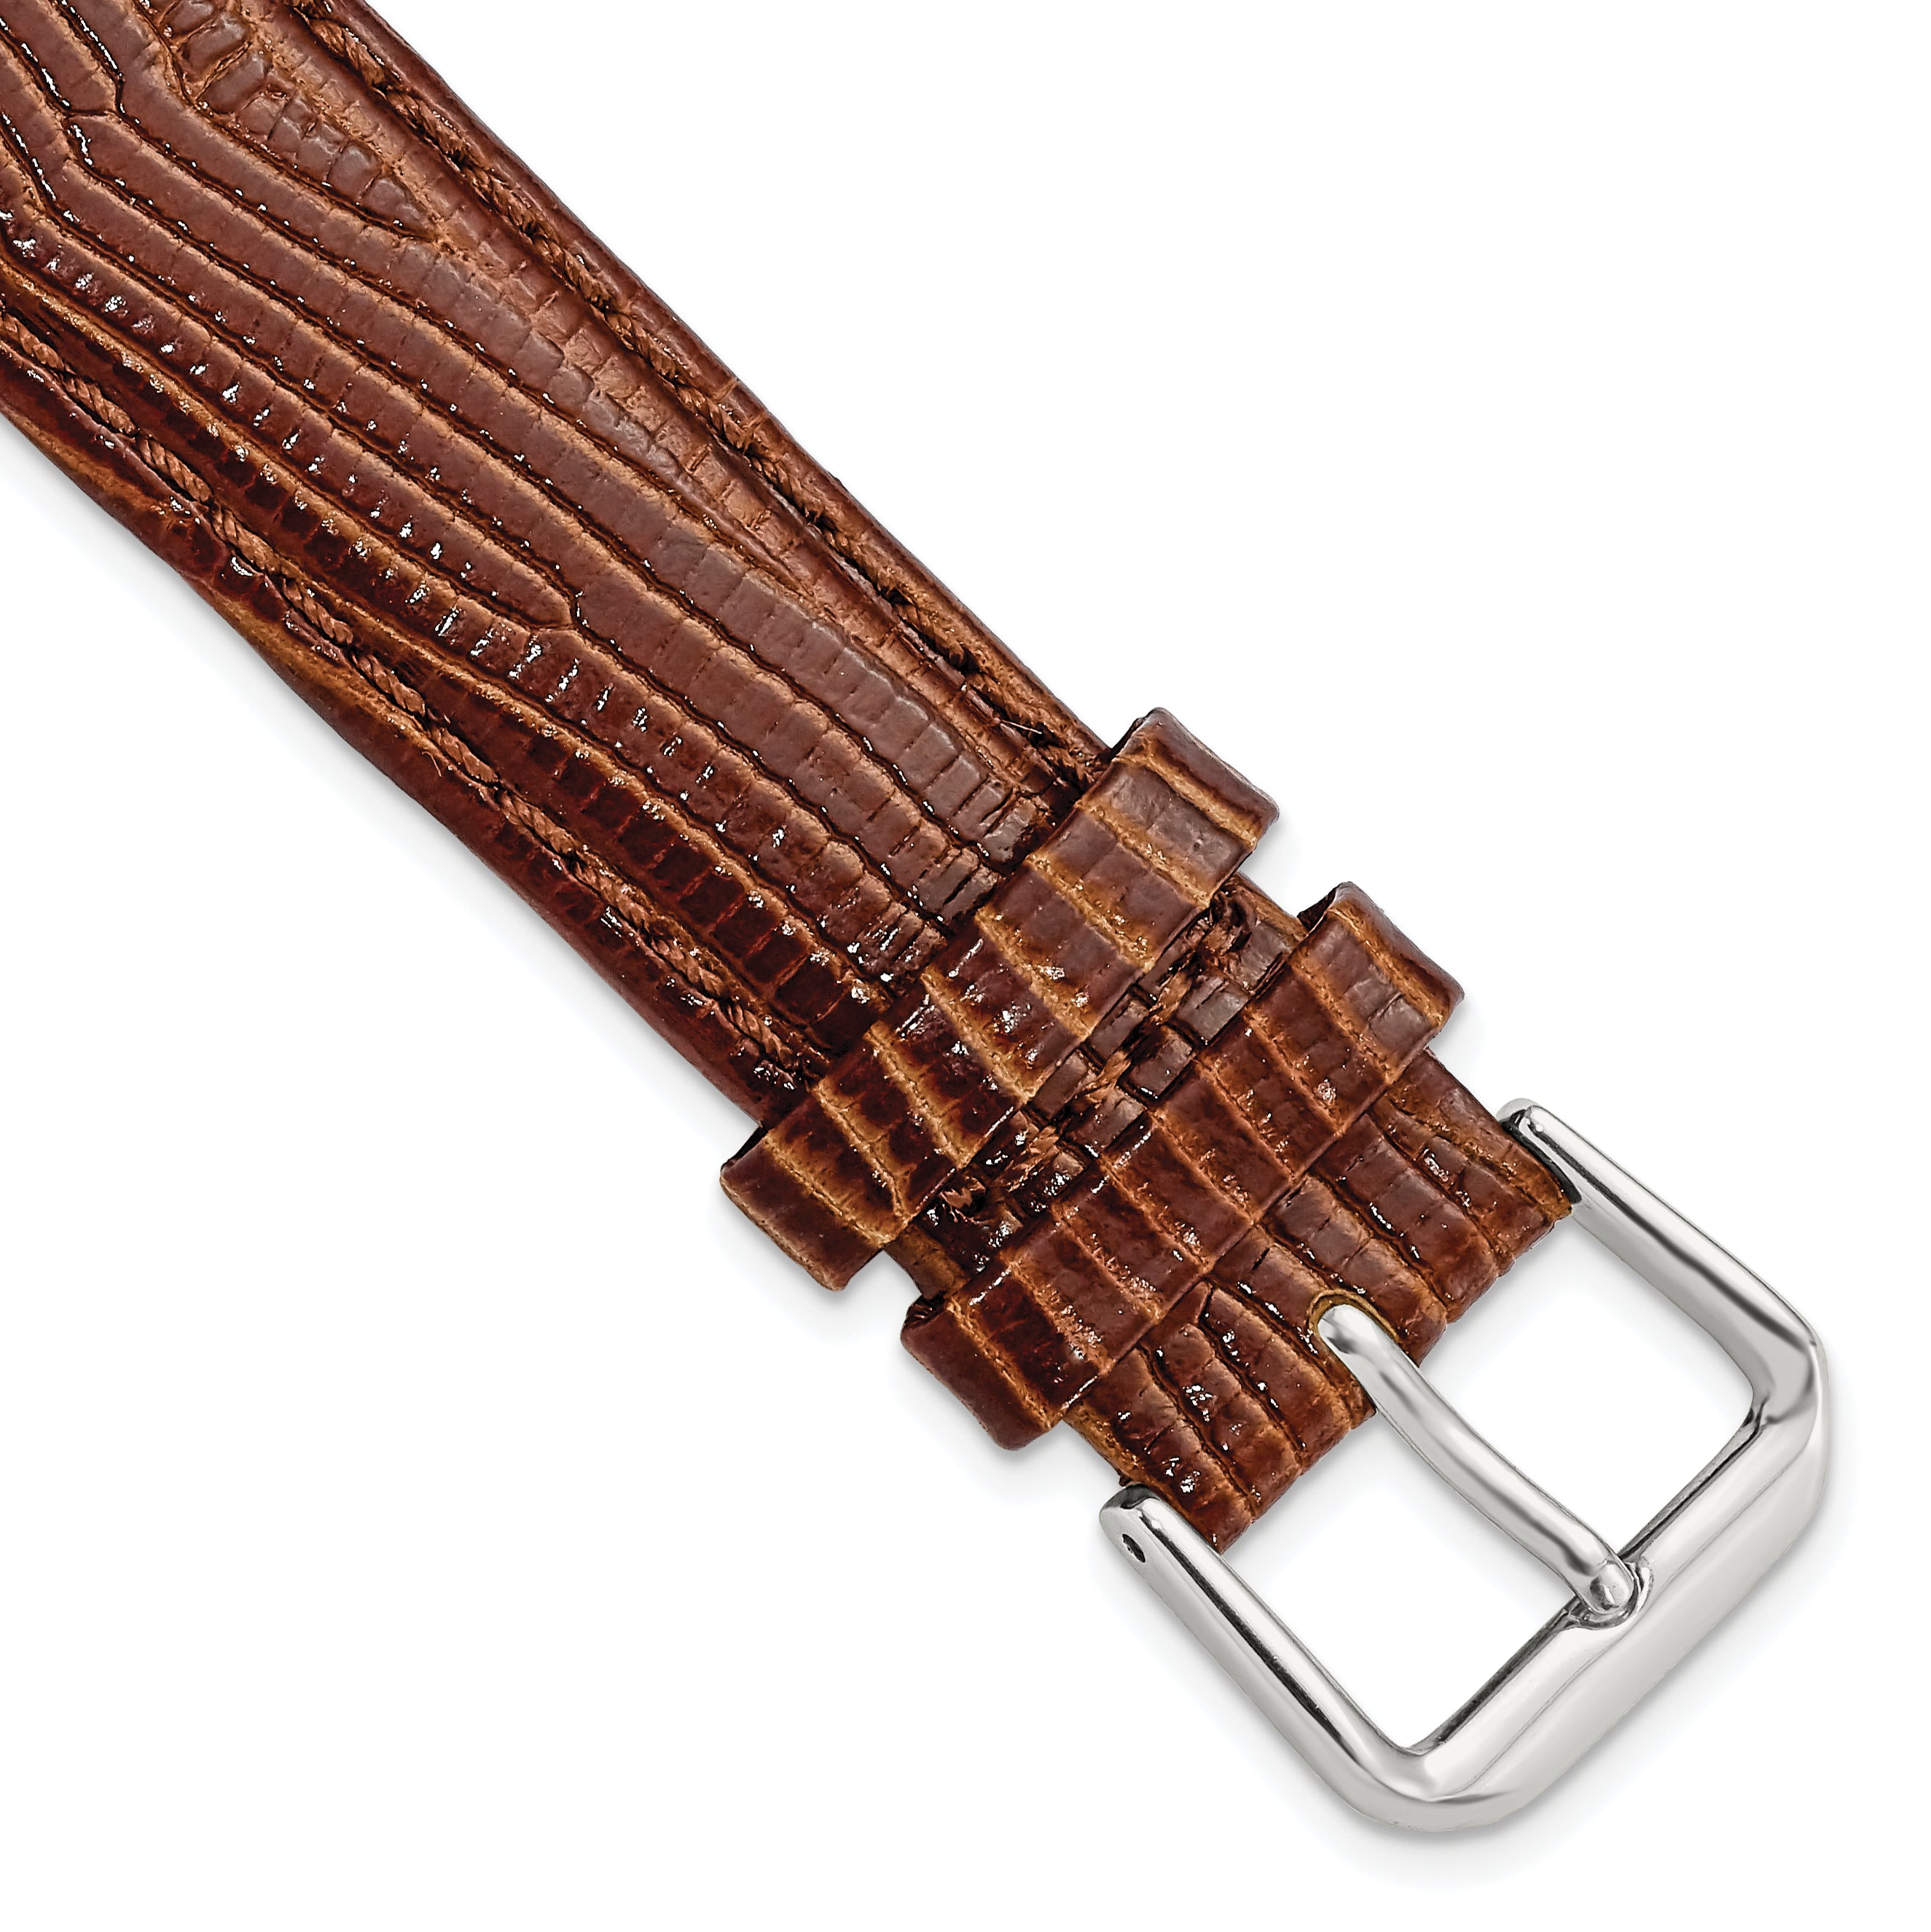 DeBeer 18mm Havana Brown Snake Grain Leather with Silver-tone Buckle 7.5 inch Watch Band